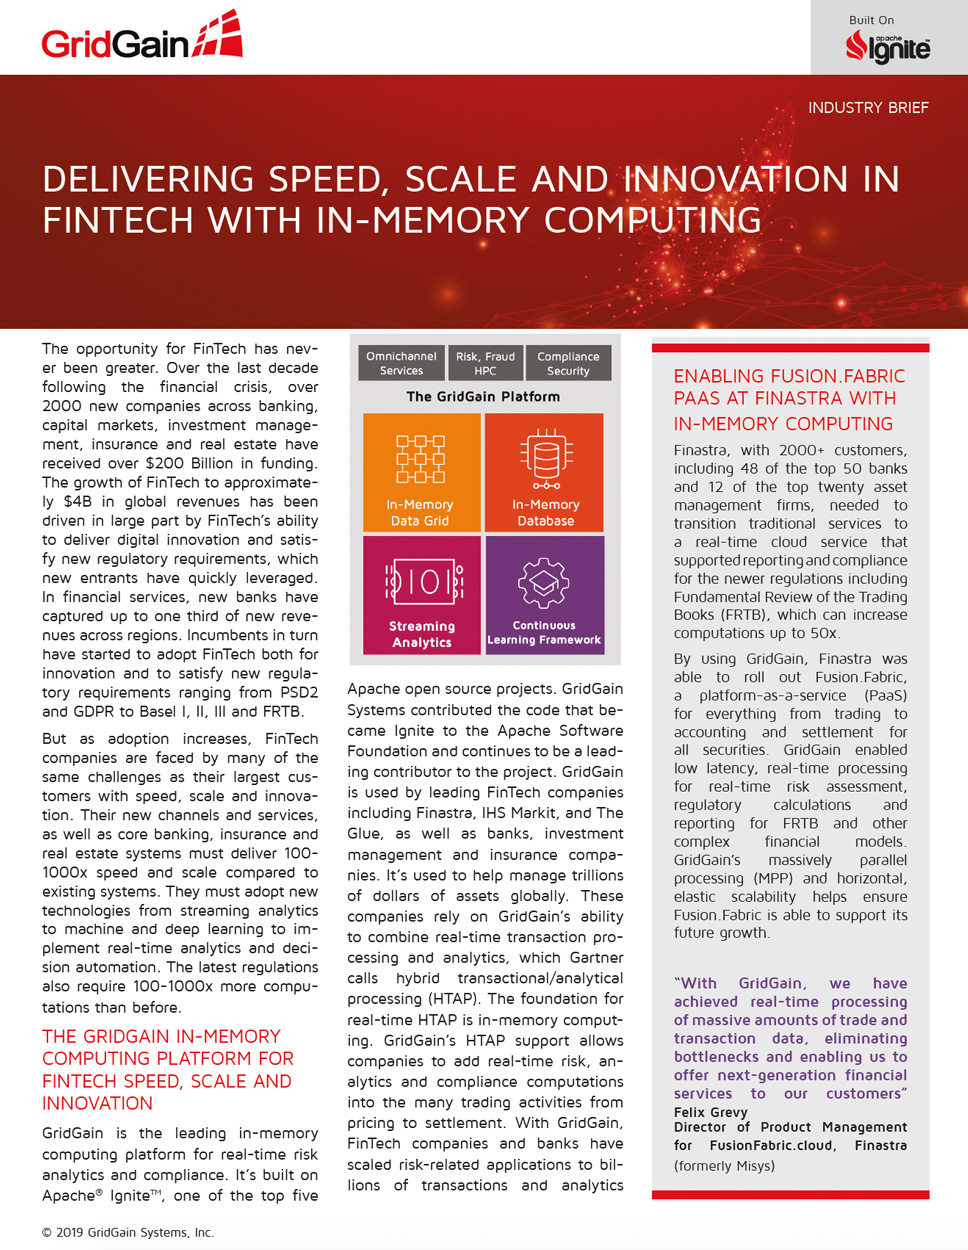 Delivering Speed, Scale and Innovation in FinTech with In-Memory Computing